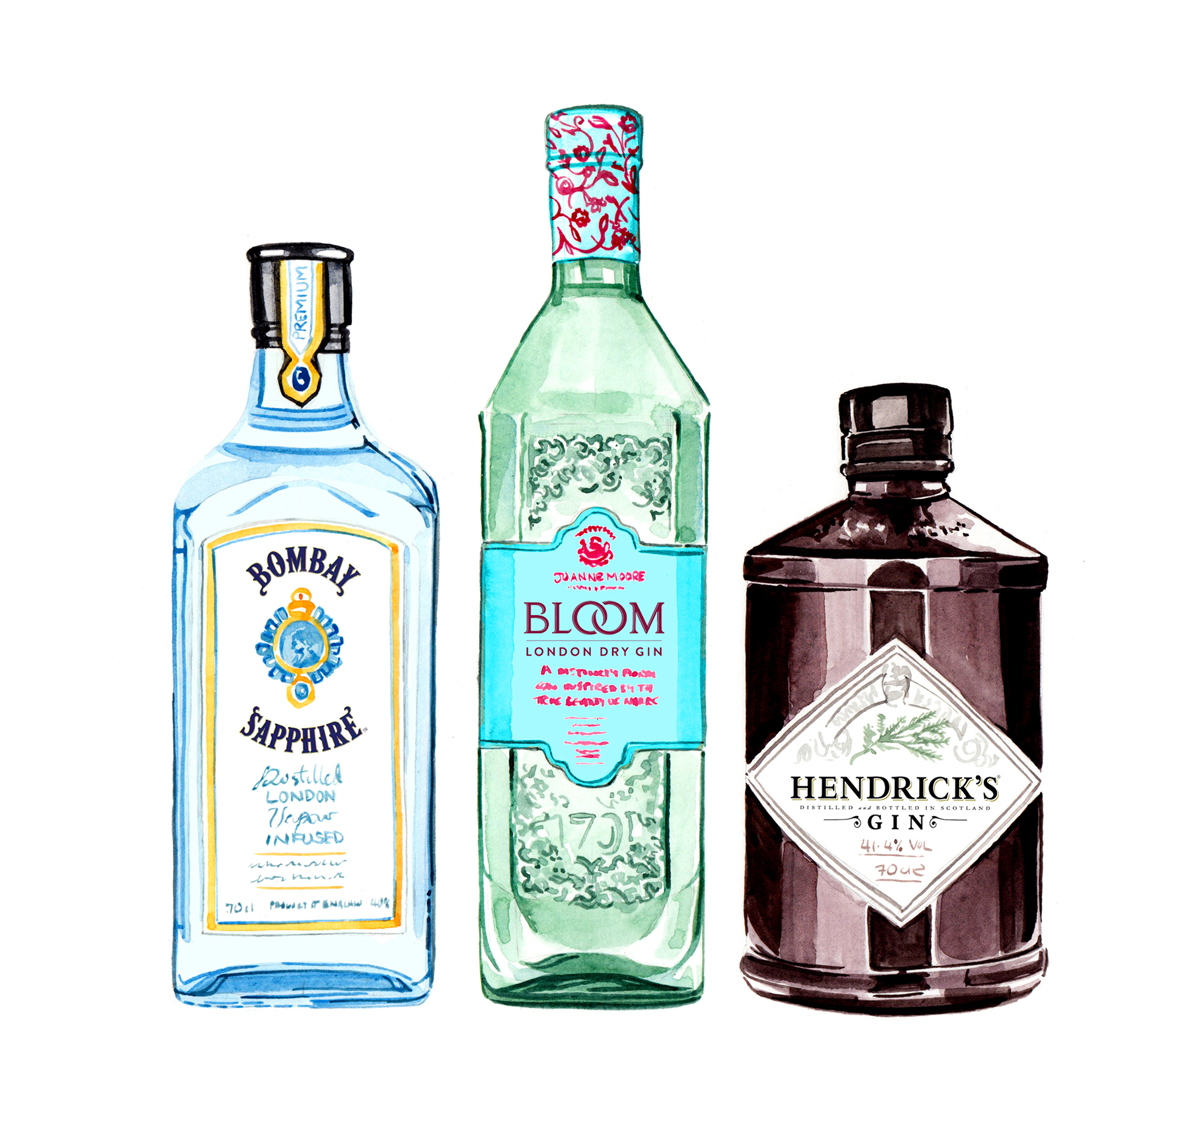 Willa Gebbie watercolour food and drink illustration; gin bottles for Waitrose magazine